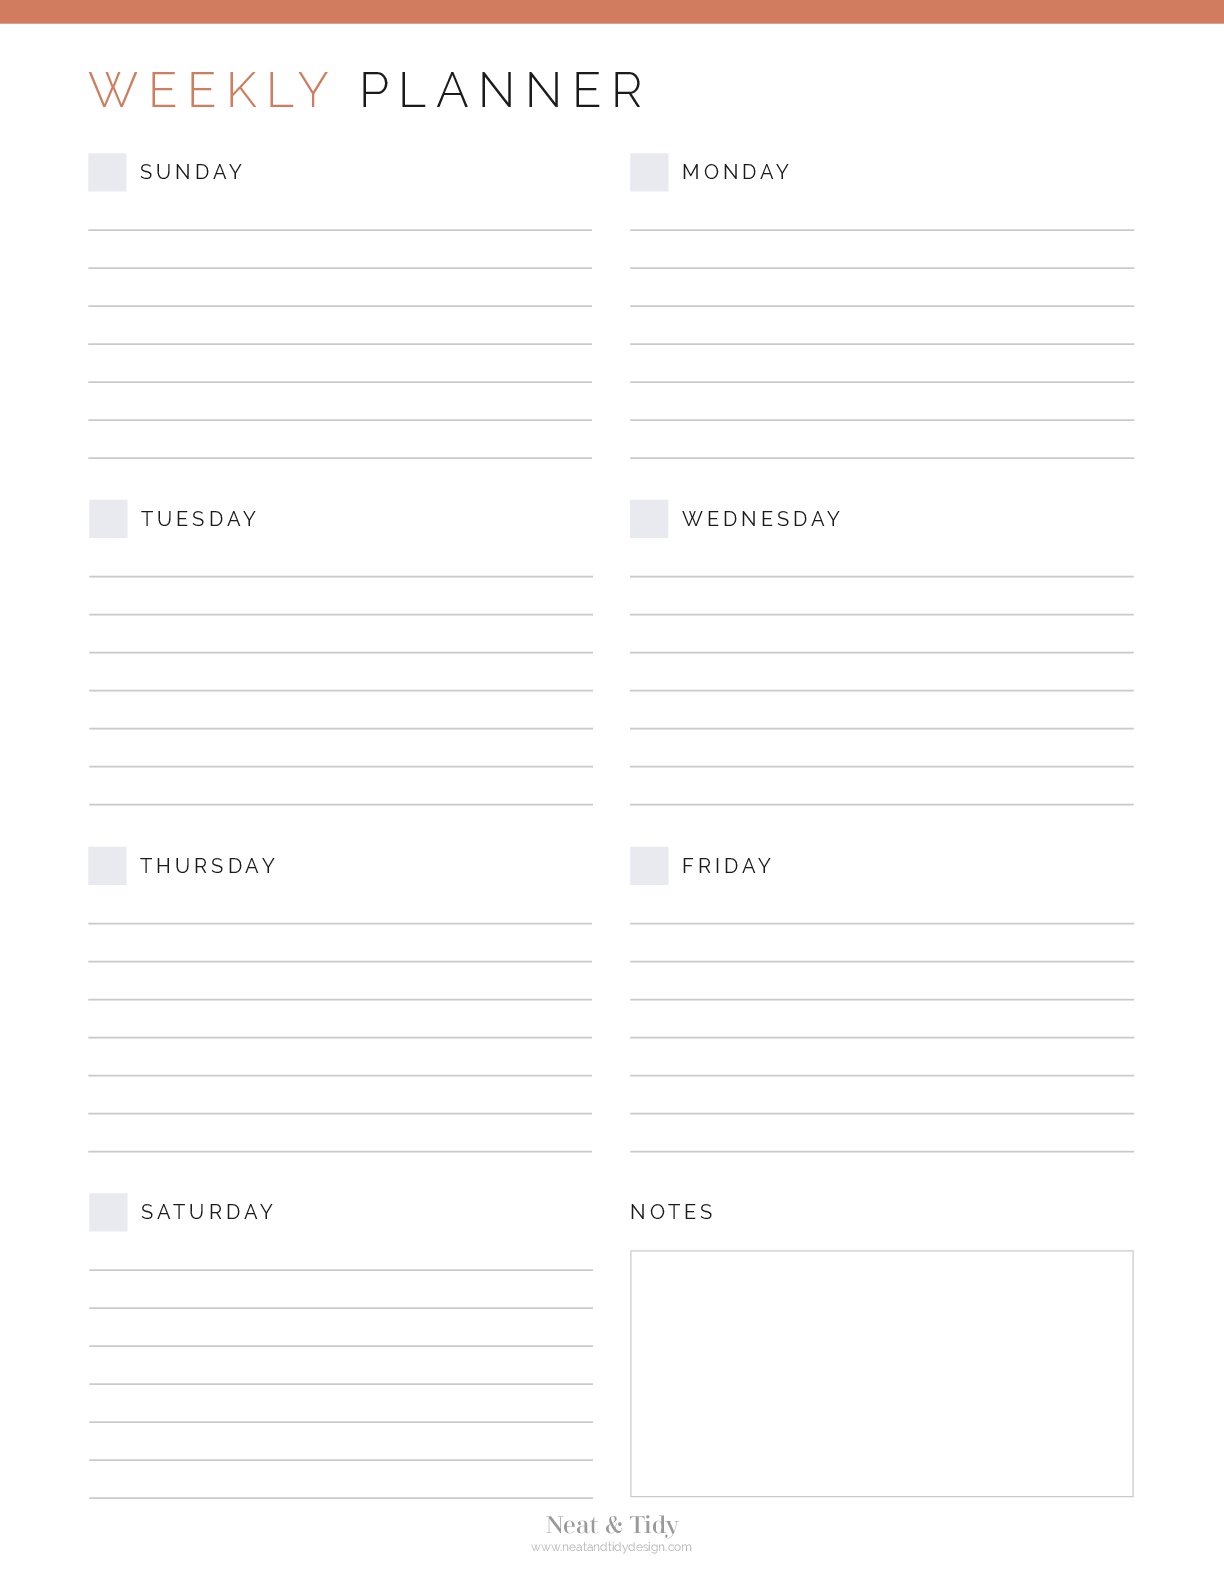 weekly-planner-neat-and-tidy-design